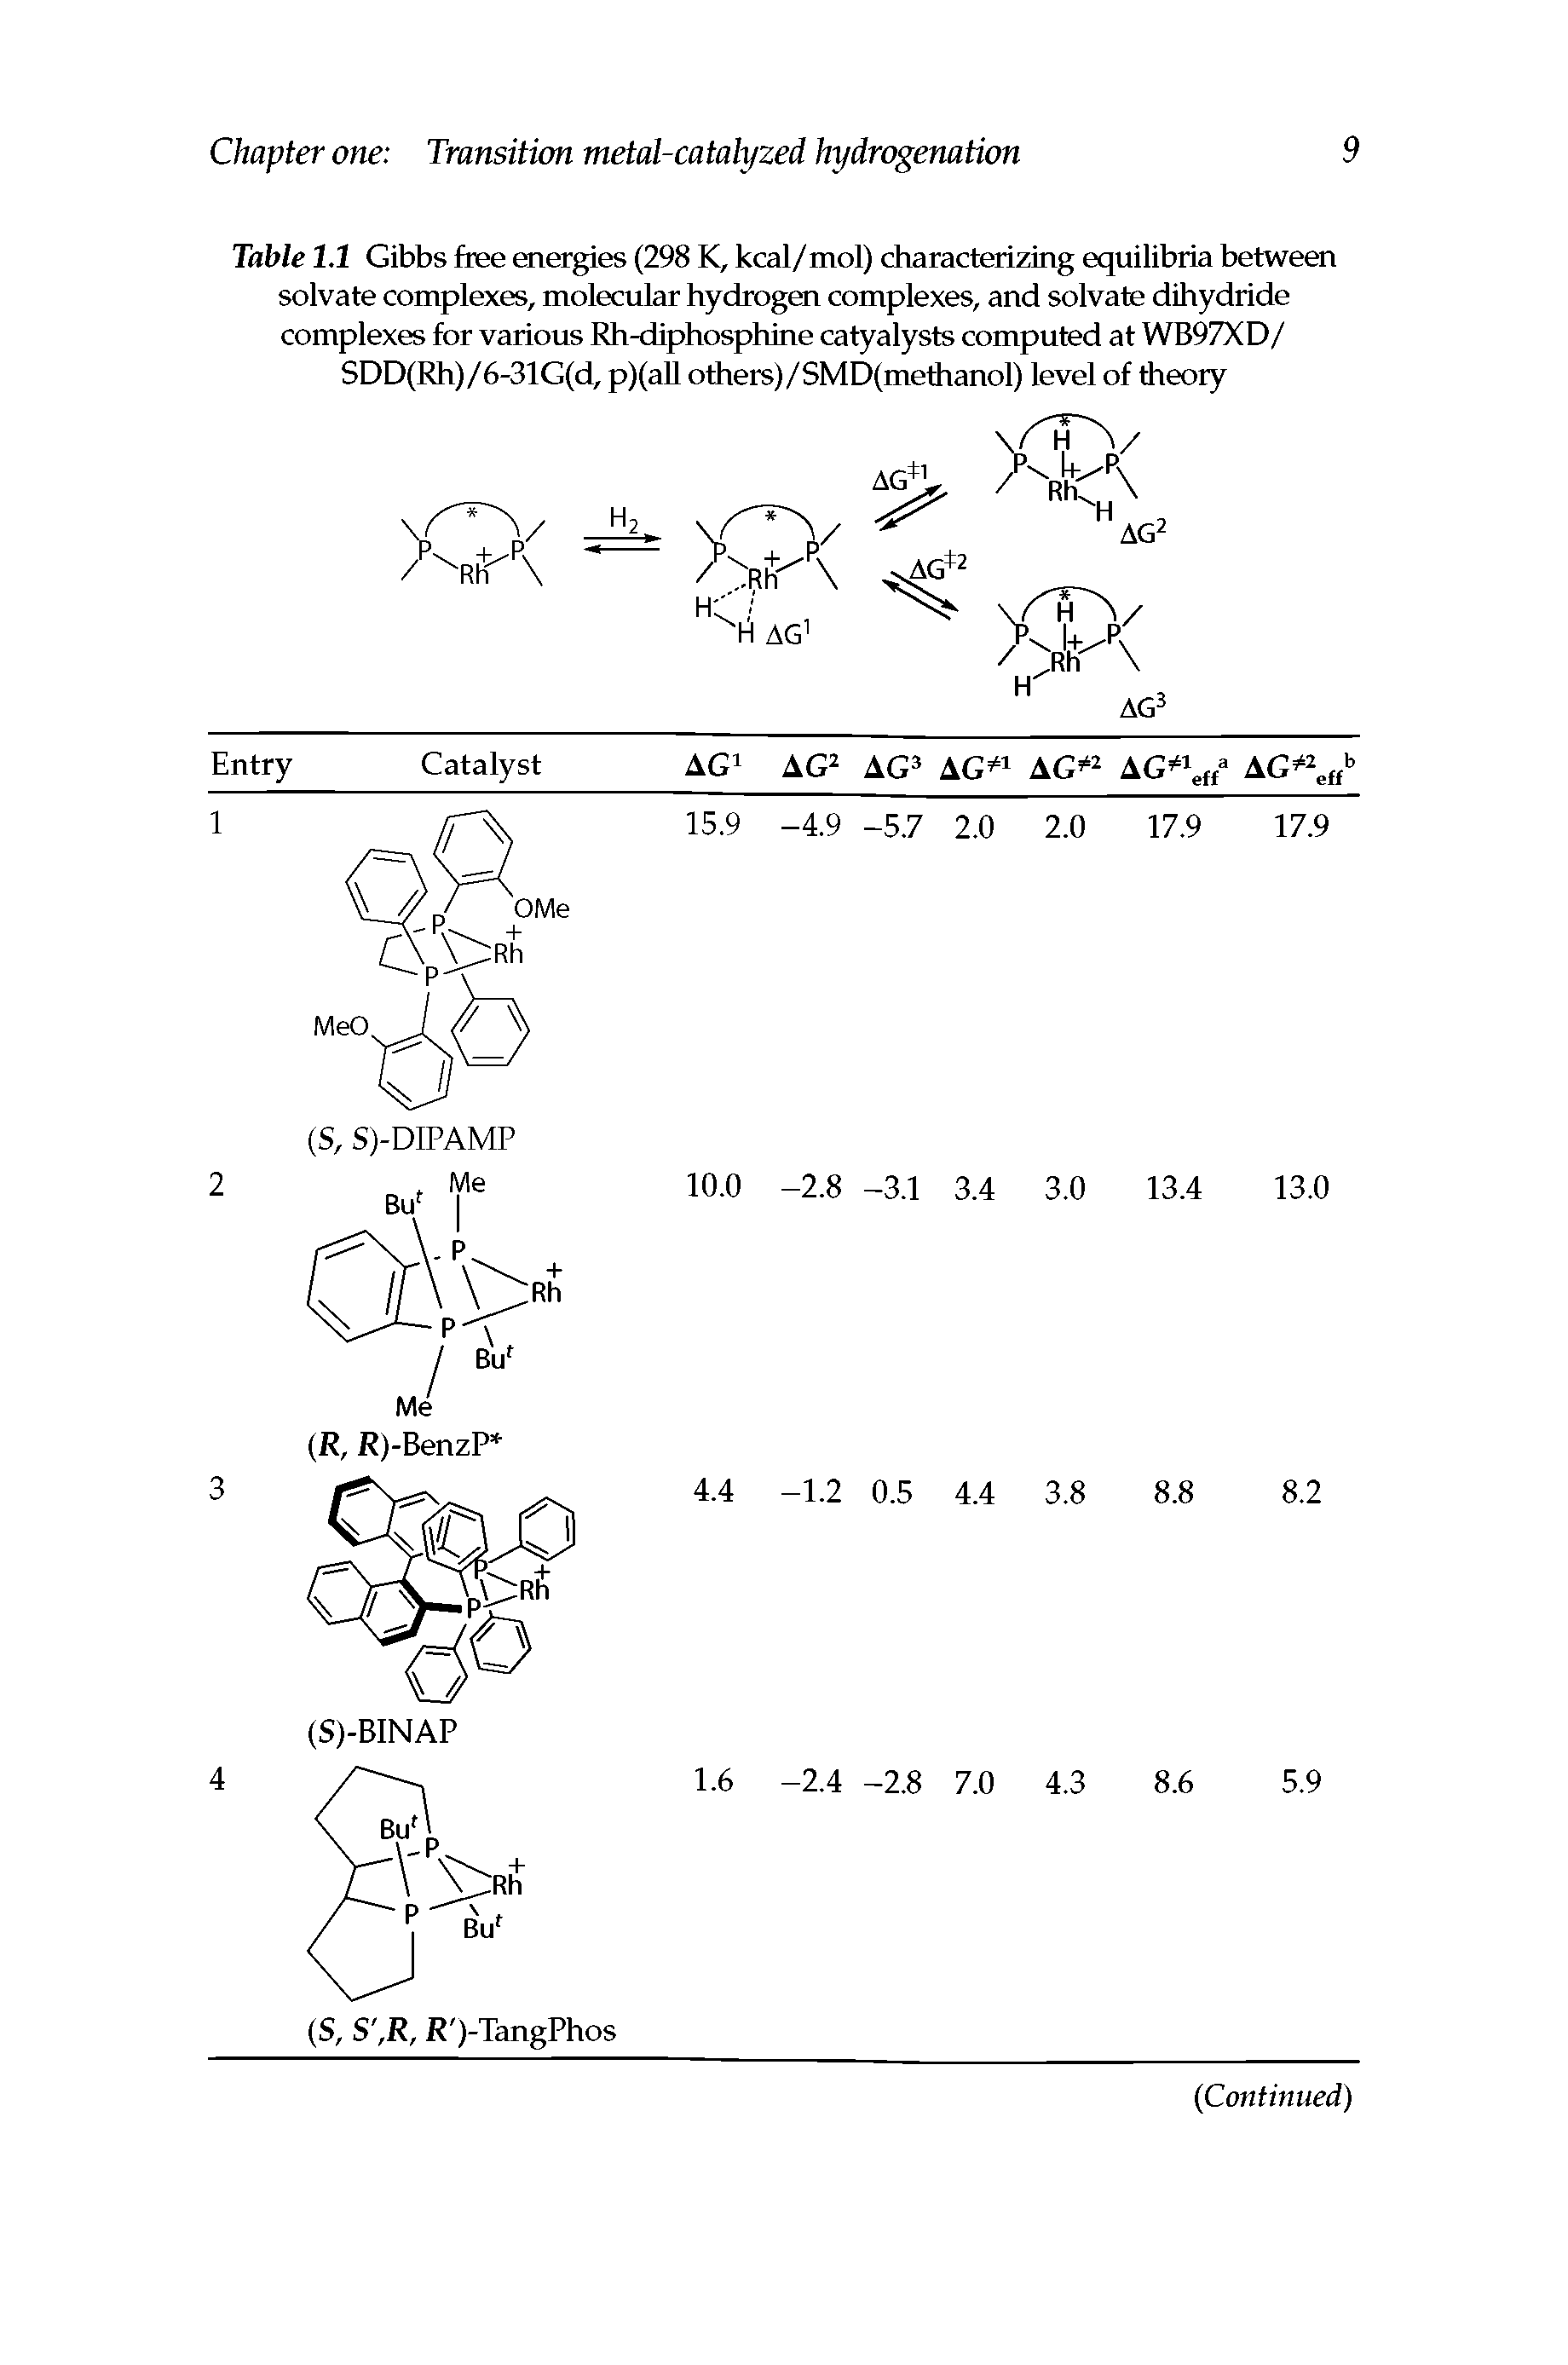 Table 1.1 Gibbs free energies (298 K, kcal/mol) characterizing equilibria between solvate complexes, molecular hydrogen complexes, and solvate dihydride complexes for various Rh-diphosphine catyalysts computed at WB97XD/ SDD(Rh)/6-31G(d, p)(aU others)/SMD(methanol) level of theory...